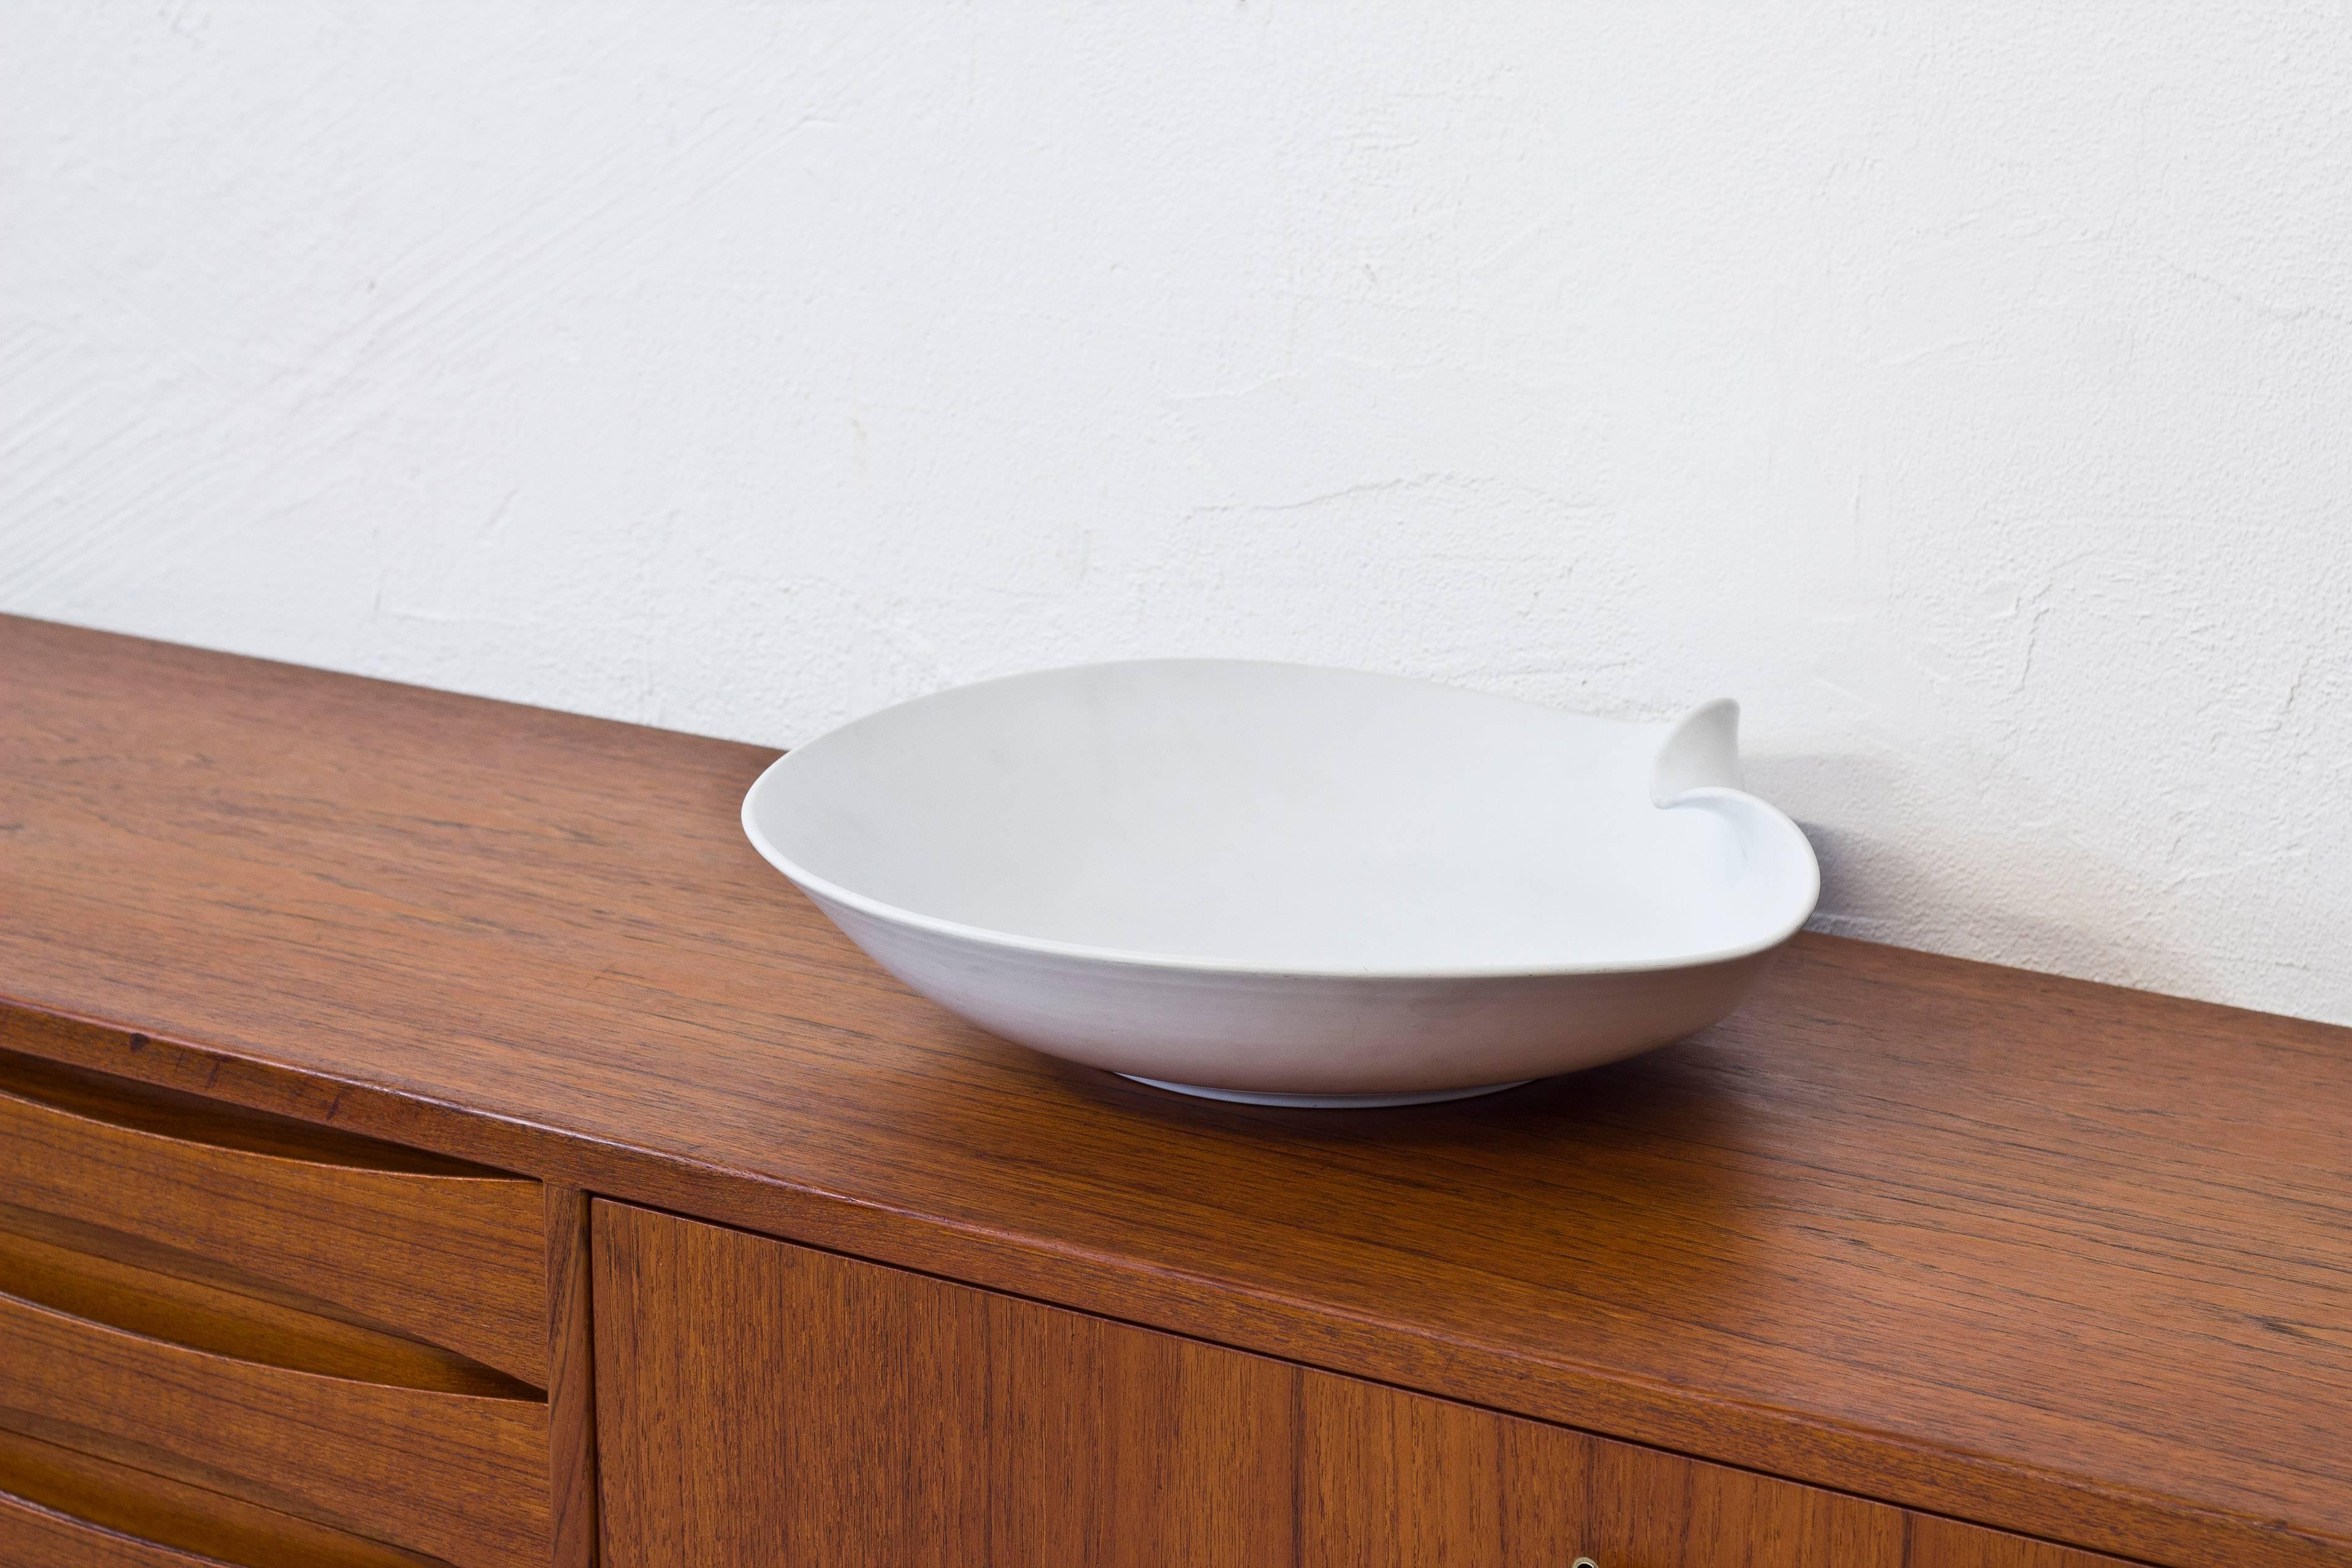 Very rare, possibly unique large bowl from the Veckla series designed by Stig Lindberg. Handmade at Gustavsberg in the 1950s. Made from white Carrara ceramics. Very good vintage condition with few signs of wear and age related patina.

 